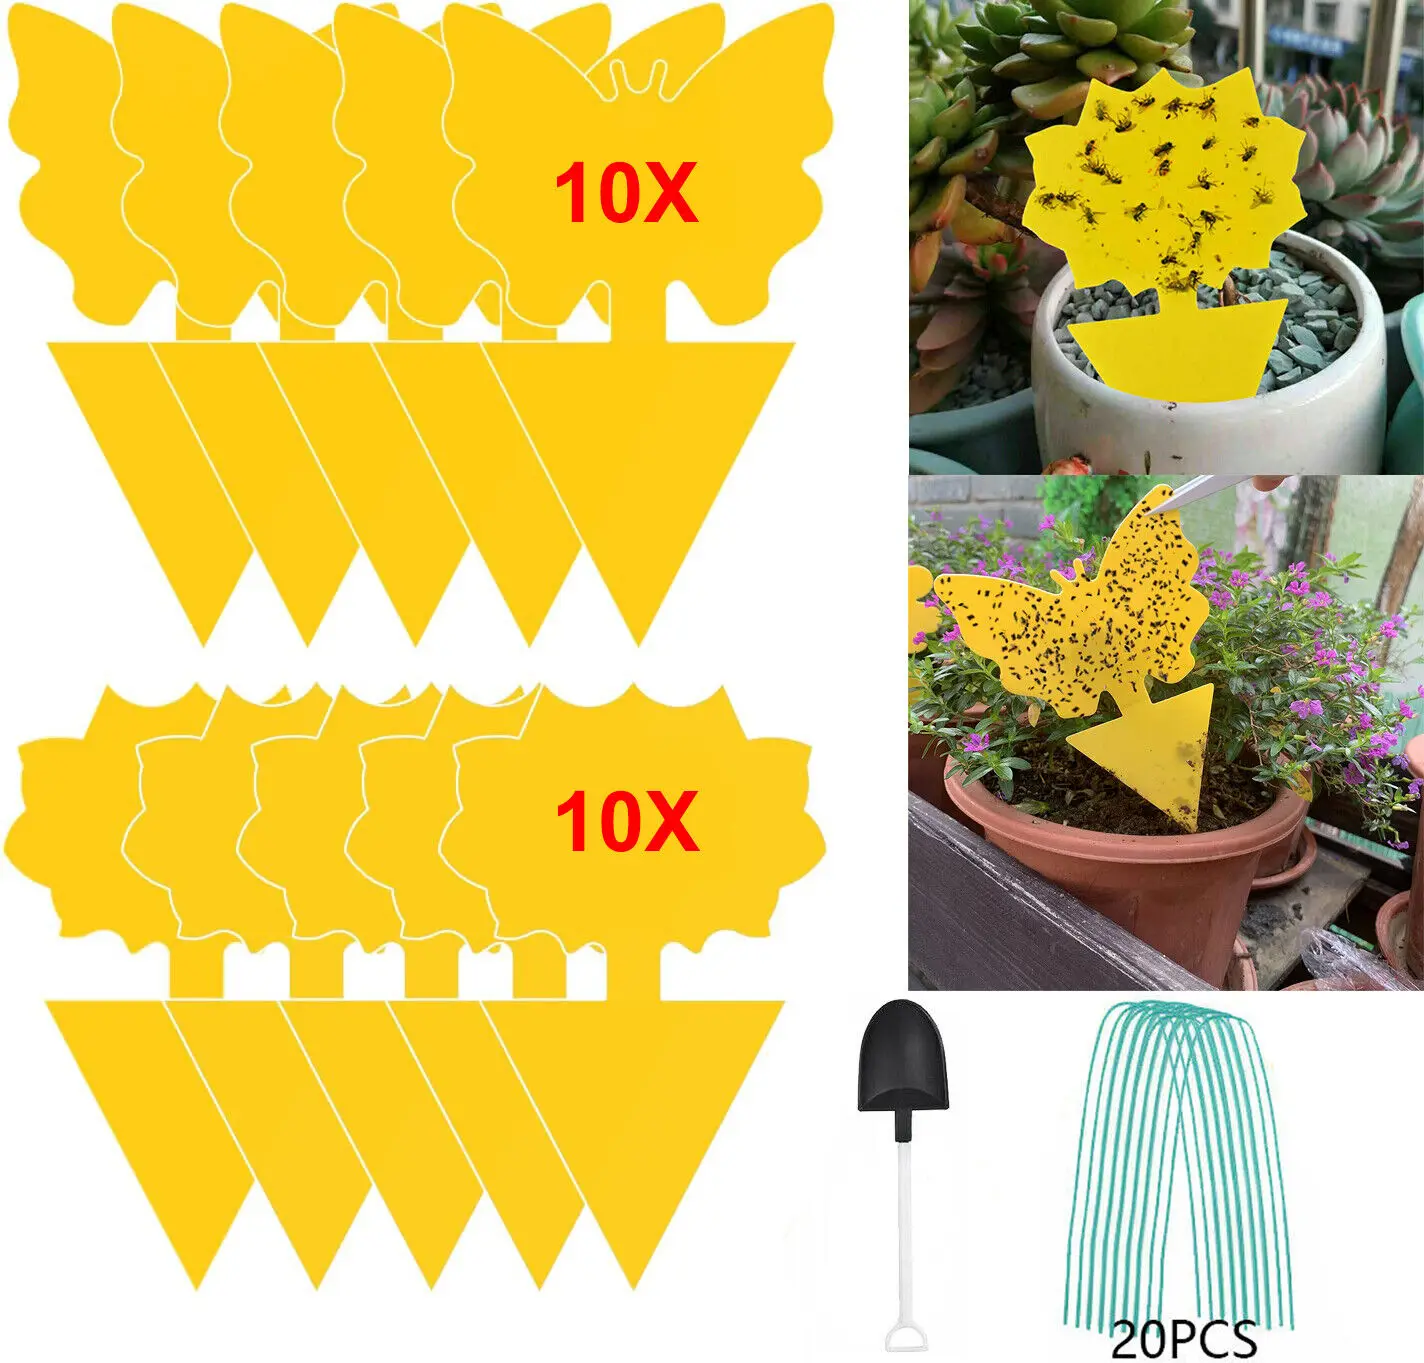 41PCS Glue Bug Catcher Aphids Insect Paper Sticky Yellow Sticky Fly Trap Paper Fruit Flies Insect Aphids Glue Catcher Bug